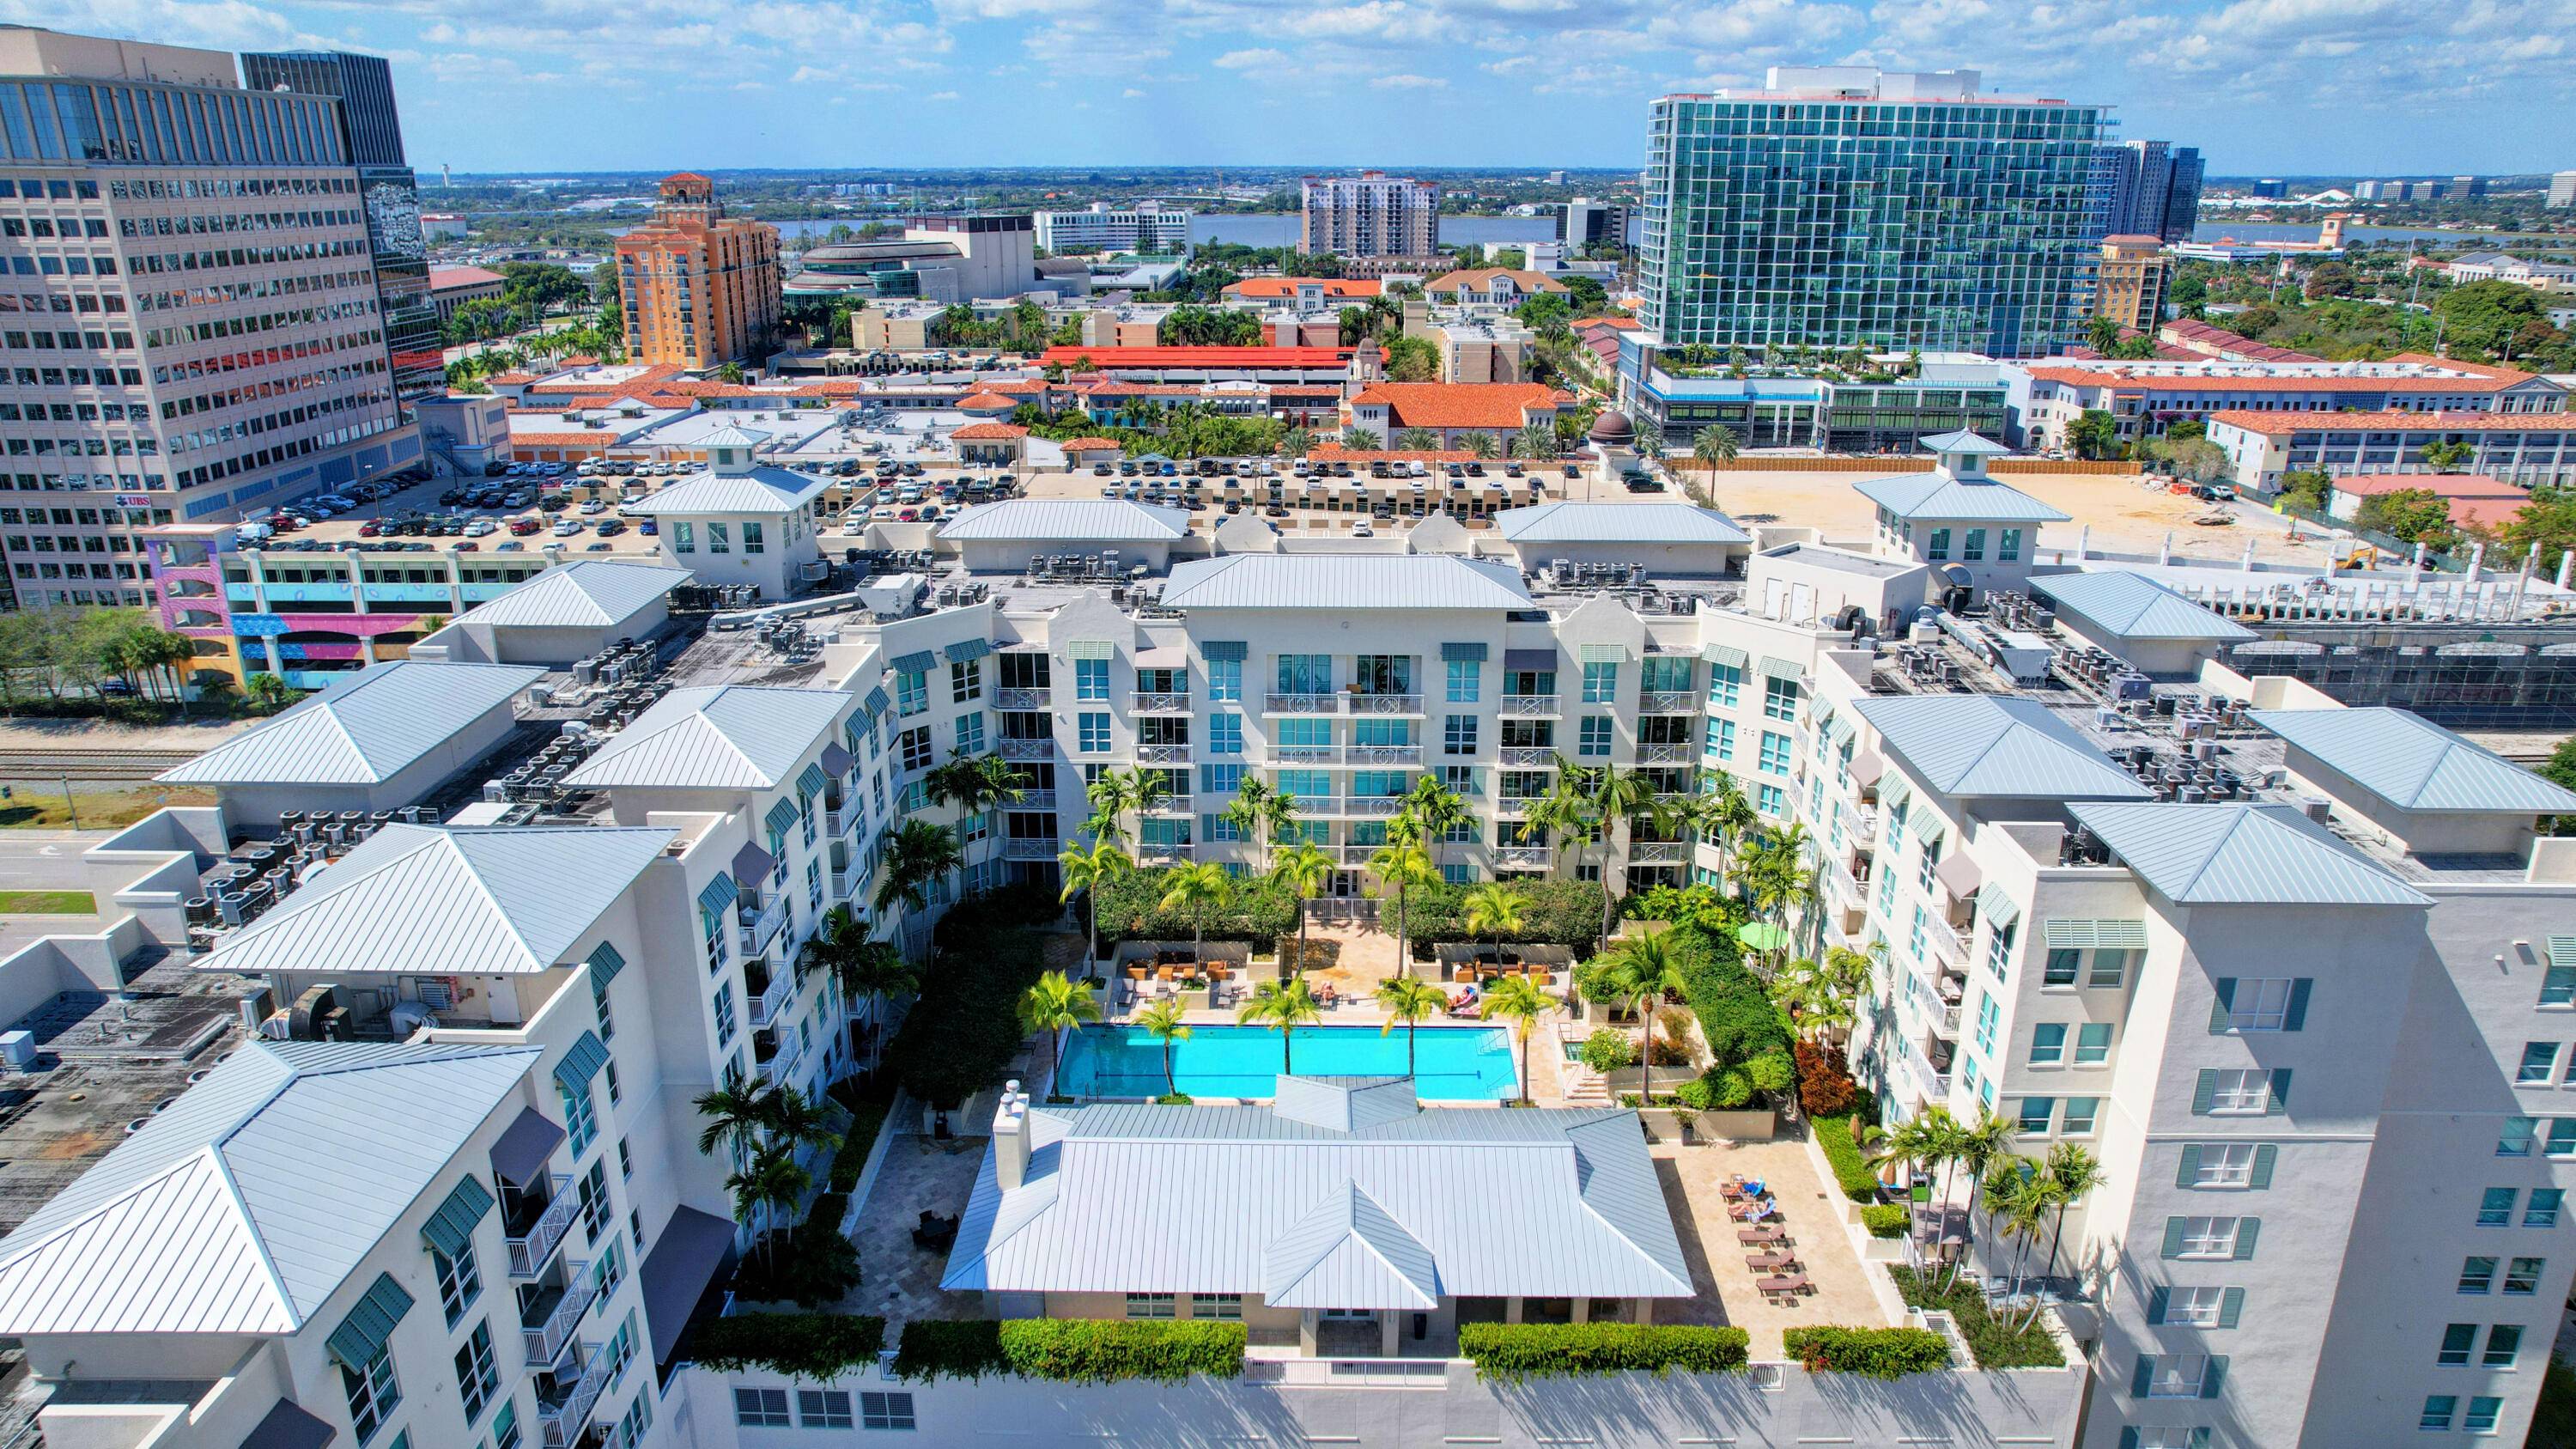 Rarely available 2 BR 2 BA at City Palms with a very large private lanai with walkout access to the tropical pool and amenity deck on the 6th floor.